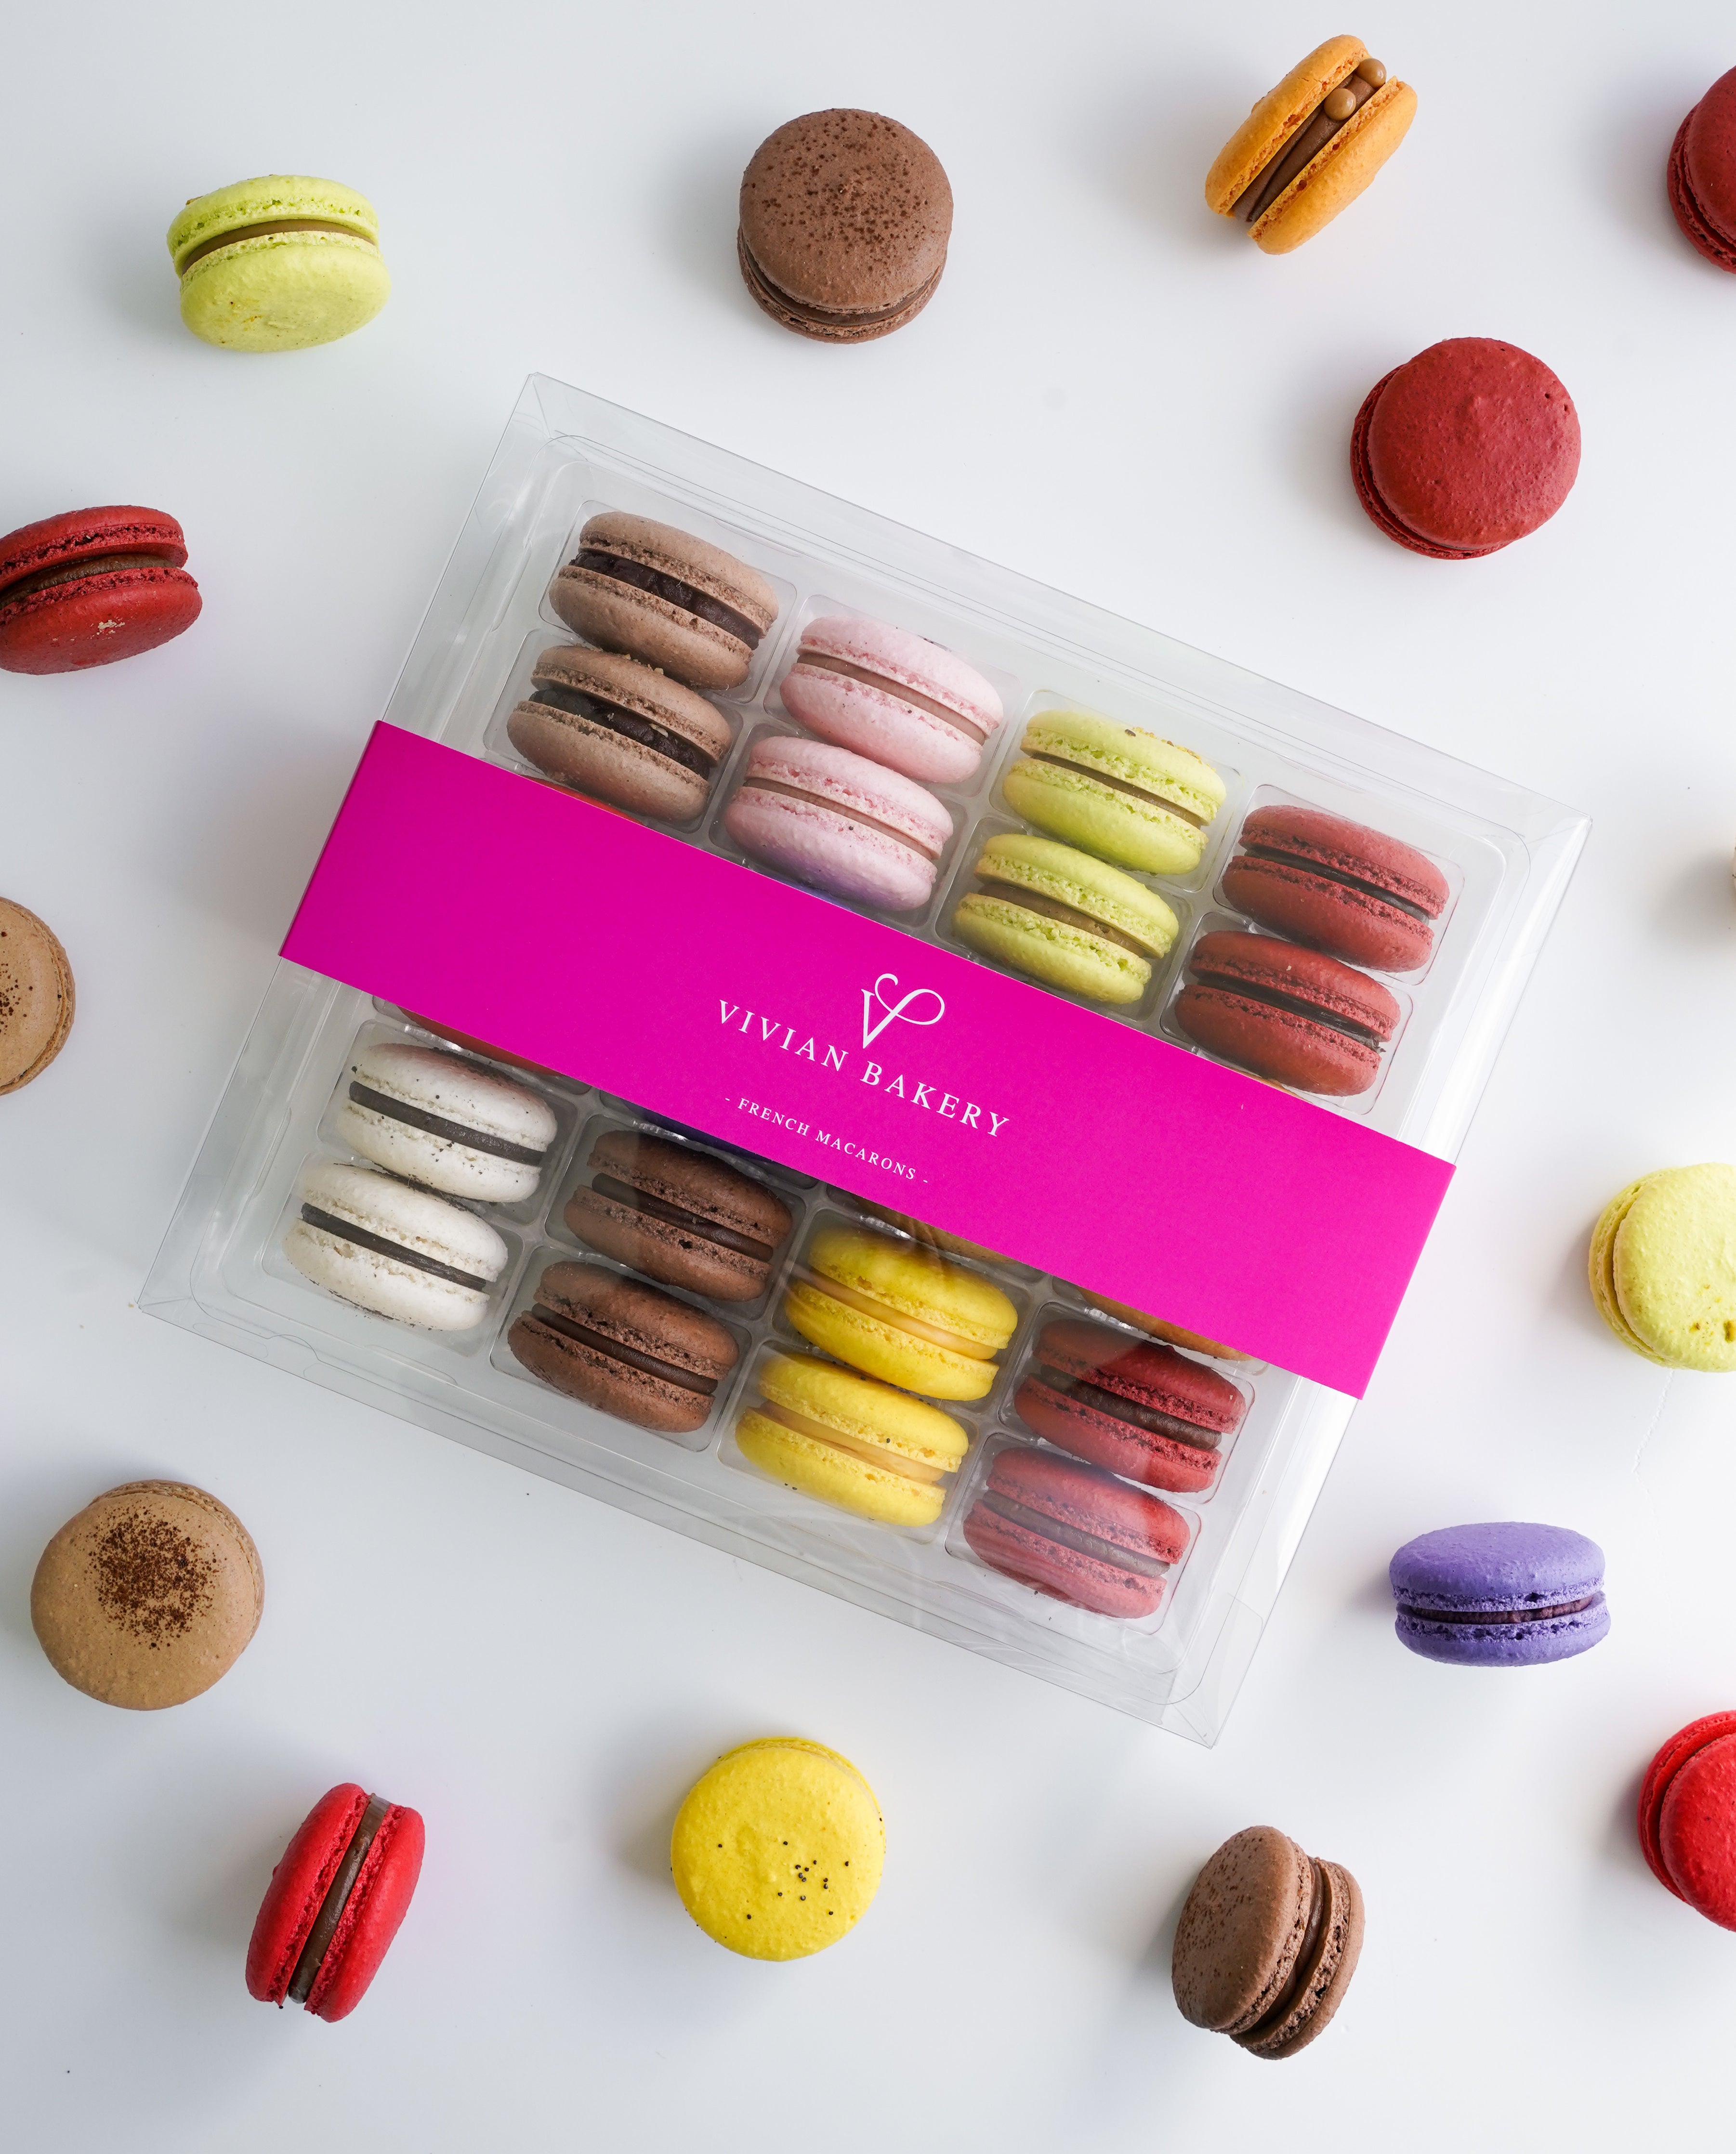 Large assorted box of macarons